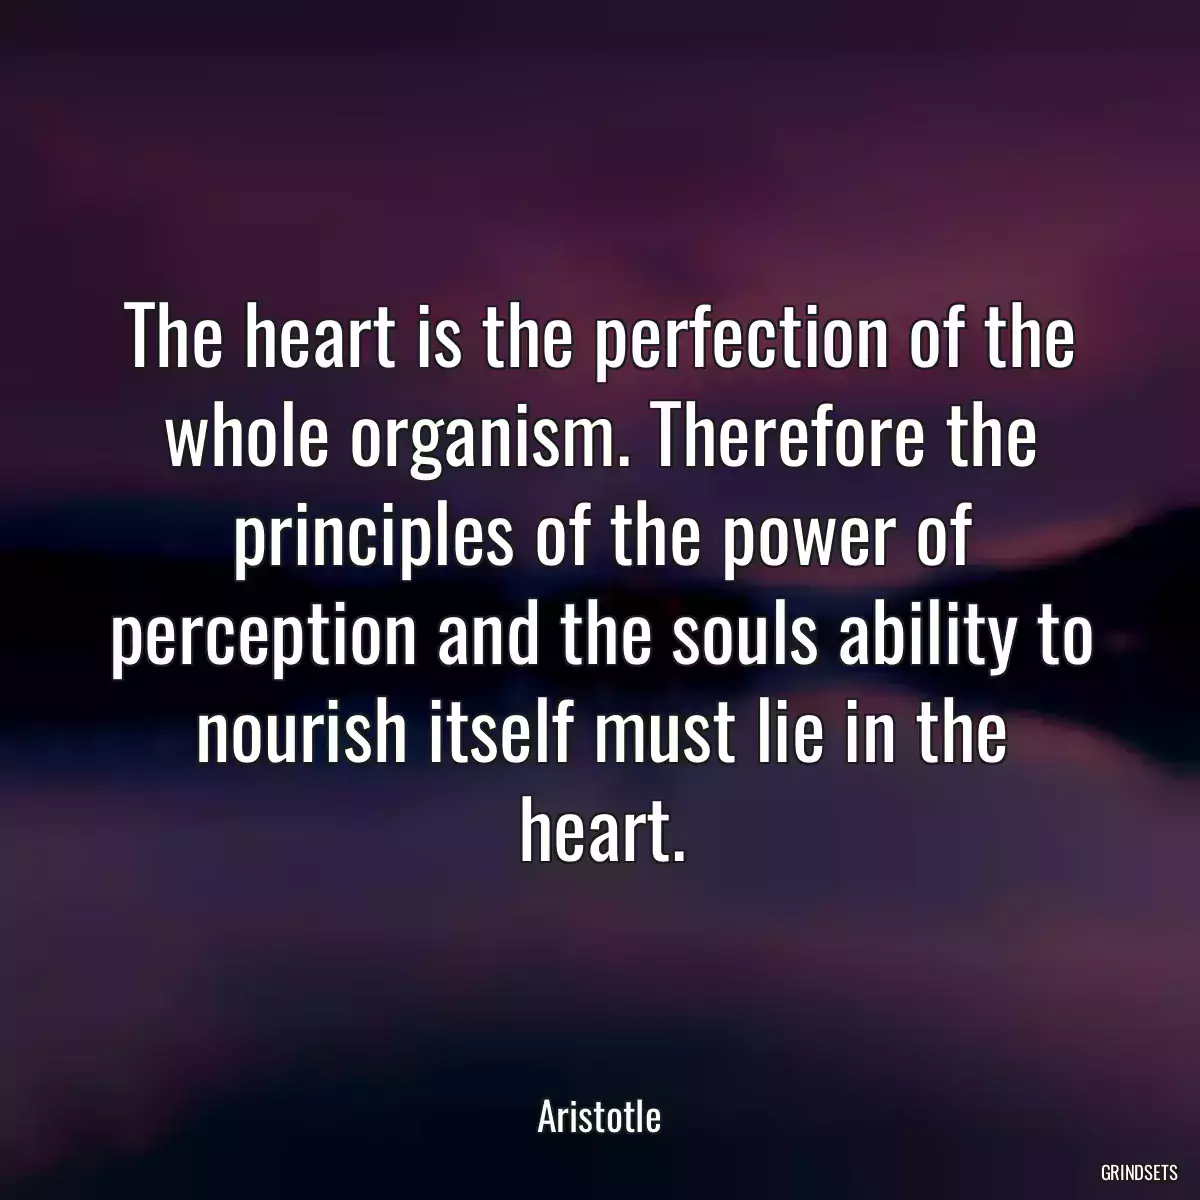 The heart is the perfection of the whole organism. Therefore the principles of the power of perception and the souls ability to nourish itself must lie in the heart.